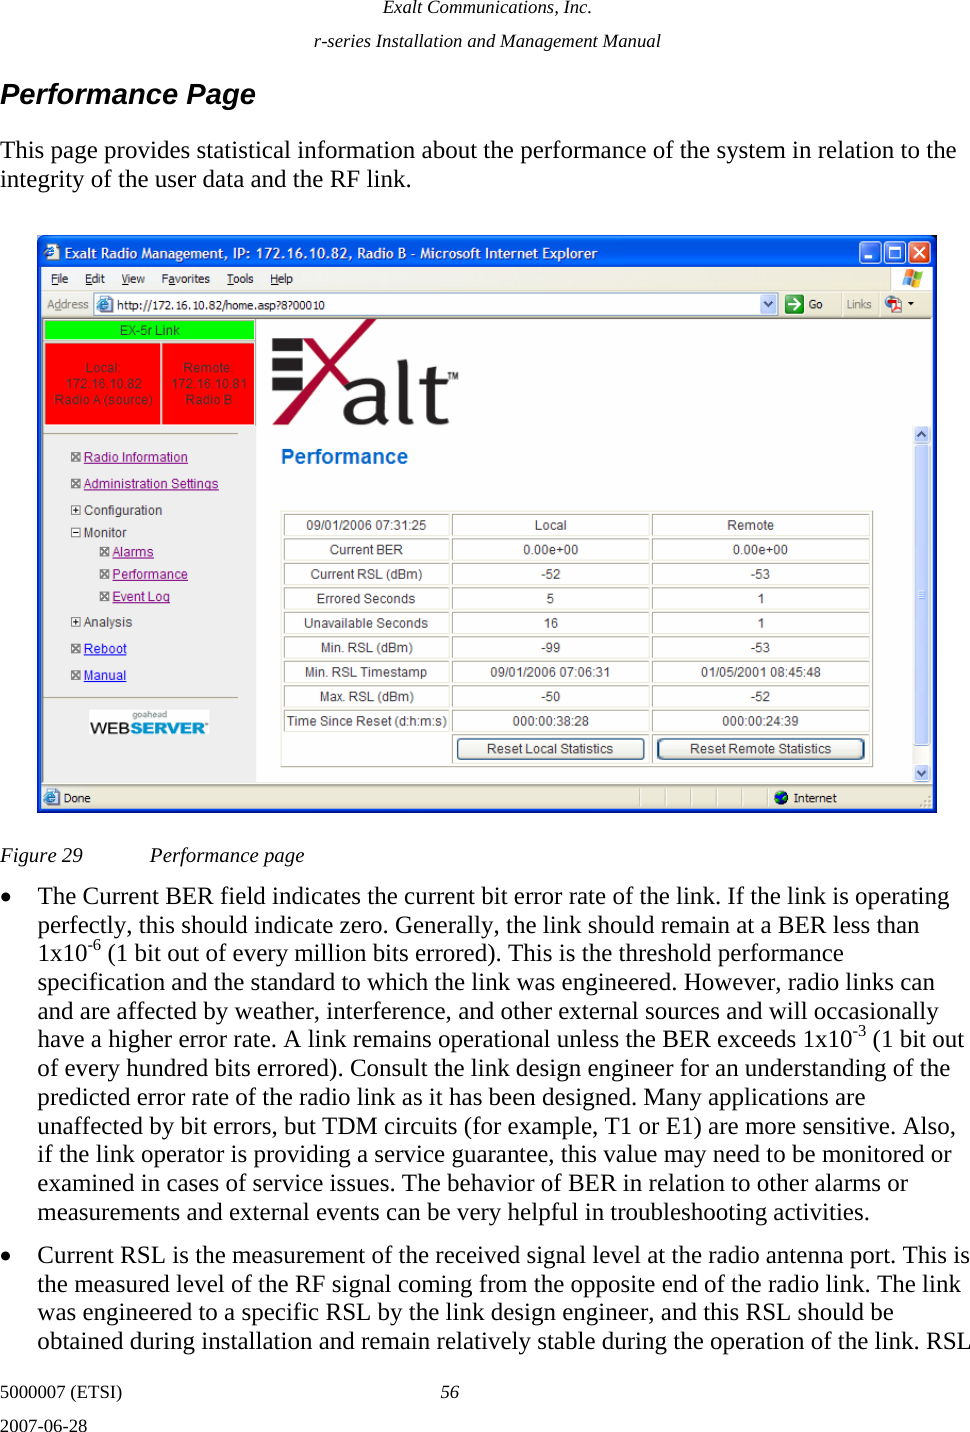 Exalt Communications, Inc. r-series Installation and Management Manual 5000007 (ETSI)  56 2007-06-28  Performance Page This page provides statistical information about the performance of the system in relation to the integrity of the user data and the RF link.  Figure 29  Performance page • The Current BER field indicates the current bit error rate of the link. If the link is operating perfectly, this should indicate zero. Generally, the link should remain at a BER less than 1x10-6 (1 bit out of every million bits errored). This is the threshold performance specification and the standard to which the link was engineered. However, radio links can and are affected by weather, interference, and other external sources and will occasionally have a higher error rate. A link remains operational unless the BER exceeds 1x10-3 (1 bit out of every hundred bits errored). Consult the link design engineer for an understanding of the predicted error rate of the radio link as it has been designed. Many applications are unaffected by bit errors, but TDM circuits (for example, T1 or E1) are more sensitive. Also, if the link operator is providing a service guarantee, this value may need to be monitored or examined in cases of service issues. The behavior of BER in relation to other alarms or measurements and external events can be very helpful in troubleshooting activities. • Current RSL is the measurement of the received signal level at the radio antenna port. This is the measured level of the RF signal coming from the opposite end of the radio link. The link was engineered to a specific RSL by the link design engineer, and this RSL should be obtained during installation and remain relatively stable during the operation of the link. RSL 